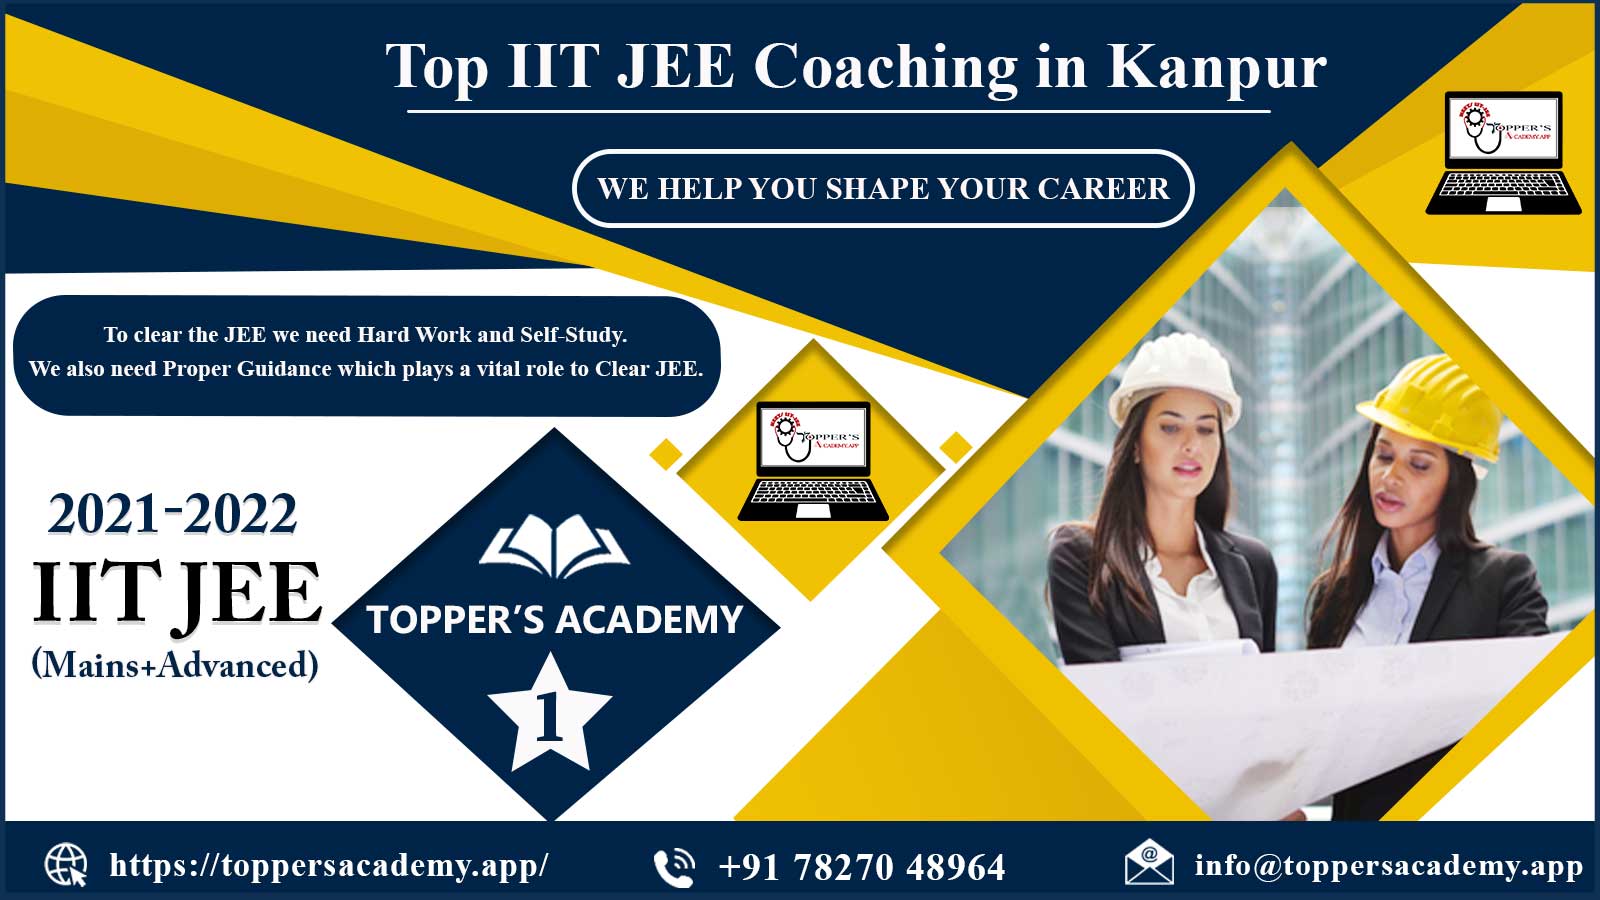 Toppers Academy IIT JEE Coaching in Kanpur